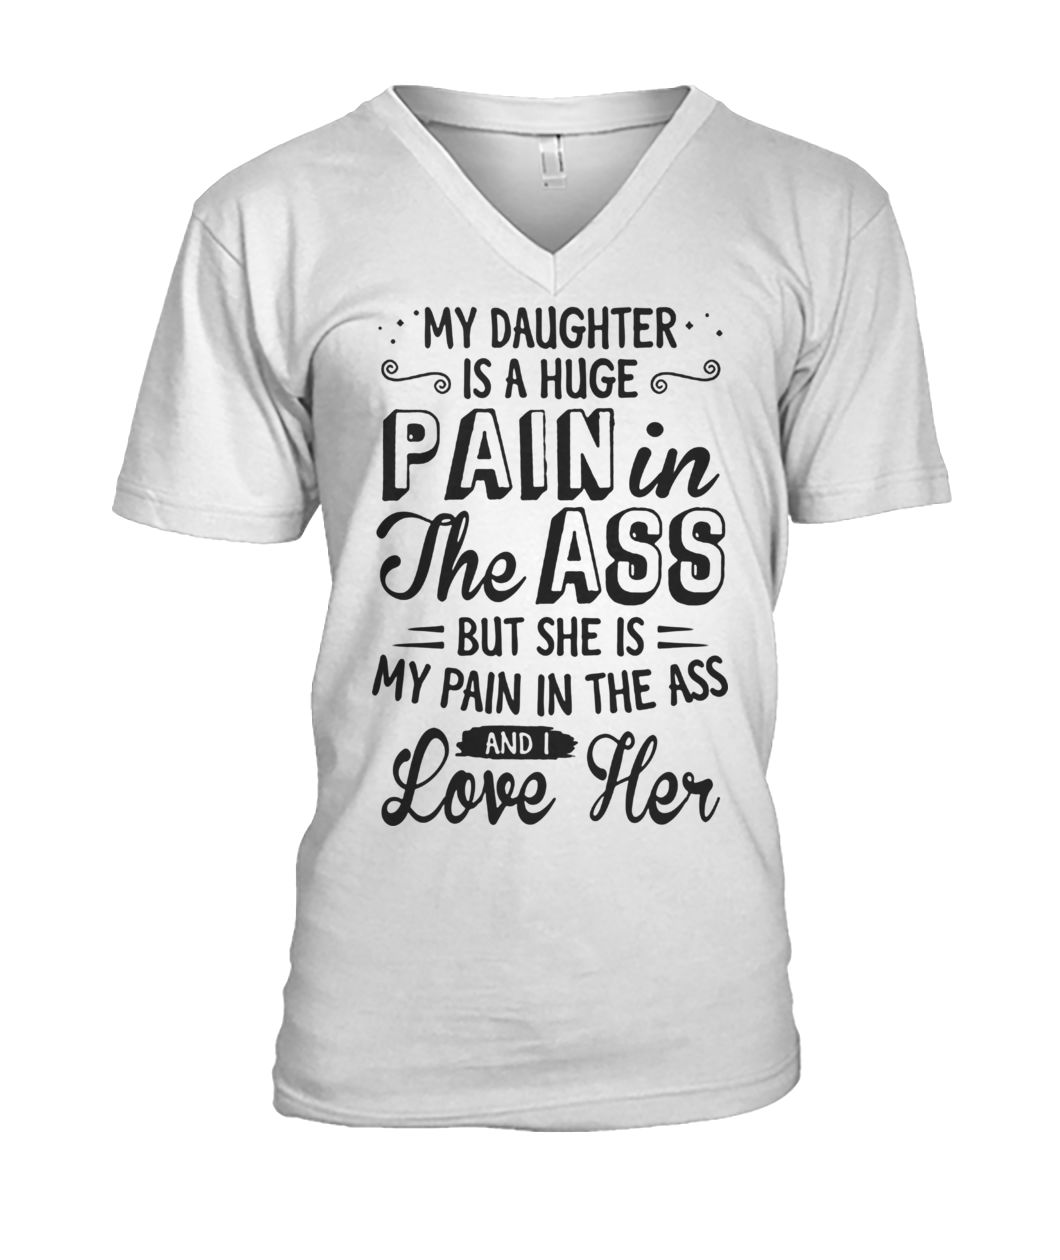 My daughter is a huge pain in the ass but she is my pain in the ass and I love her mens v-neck